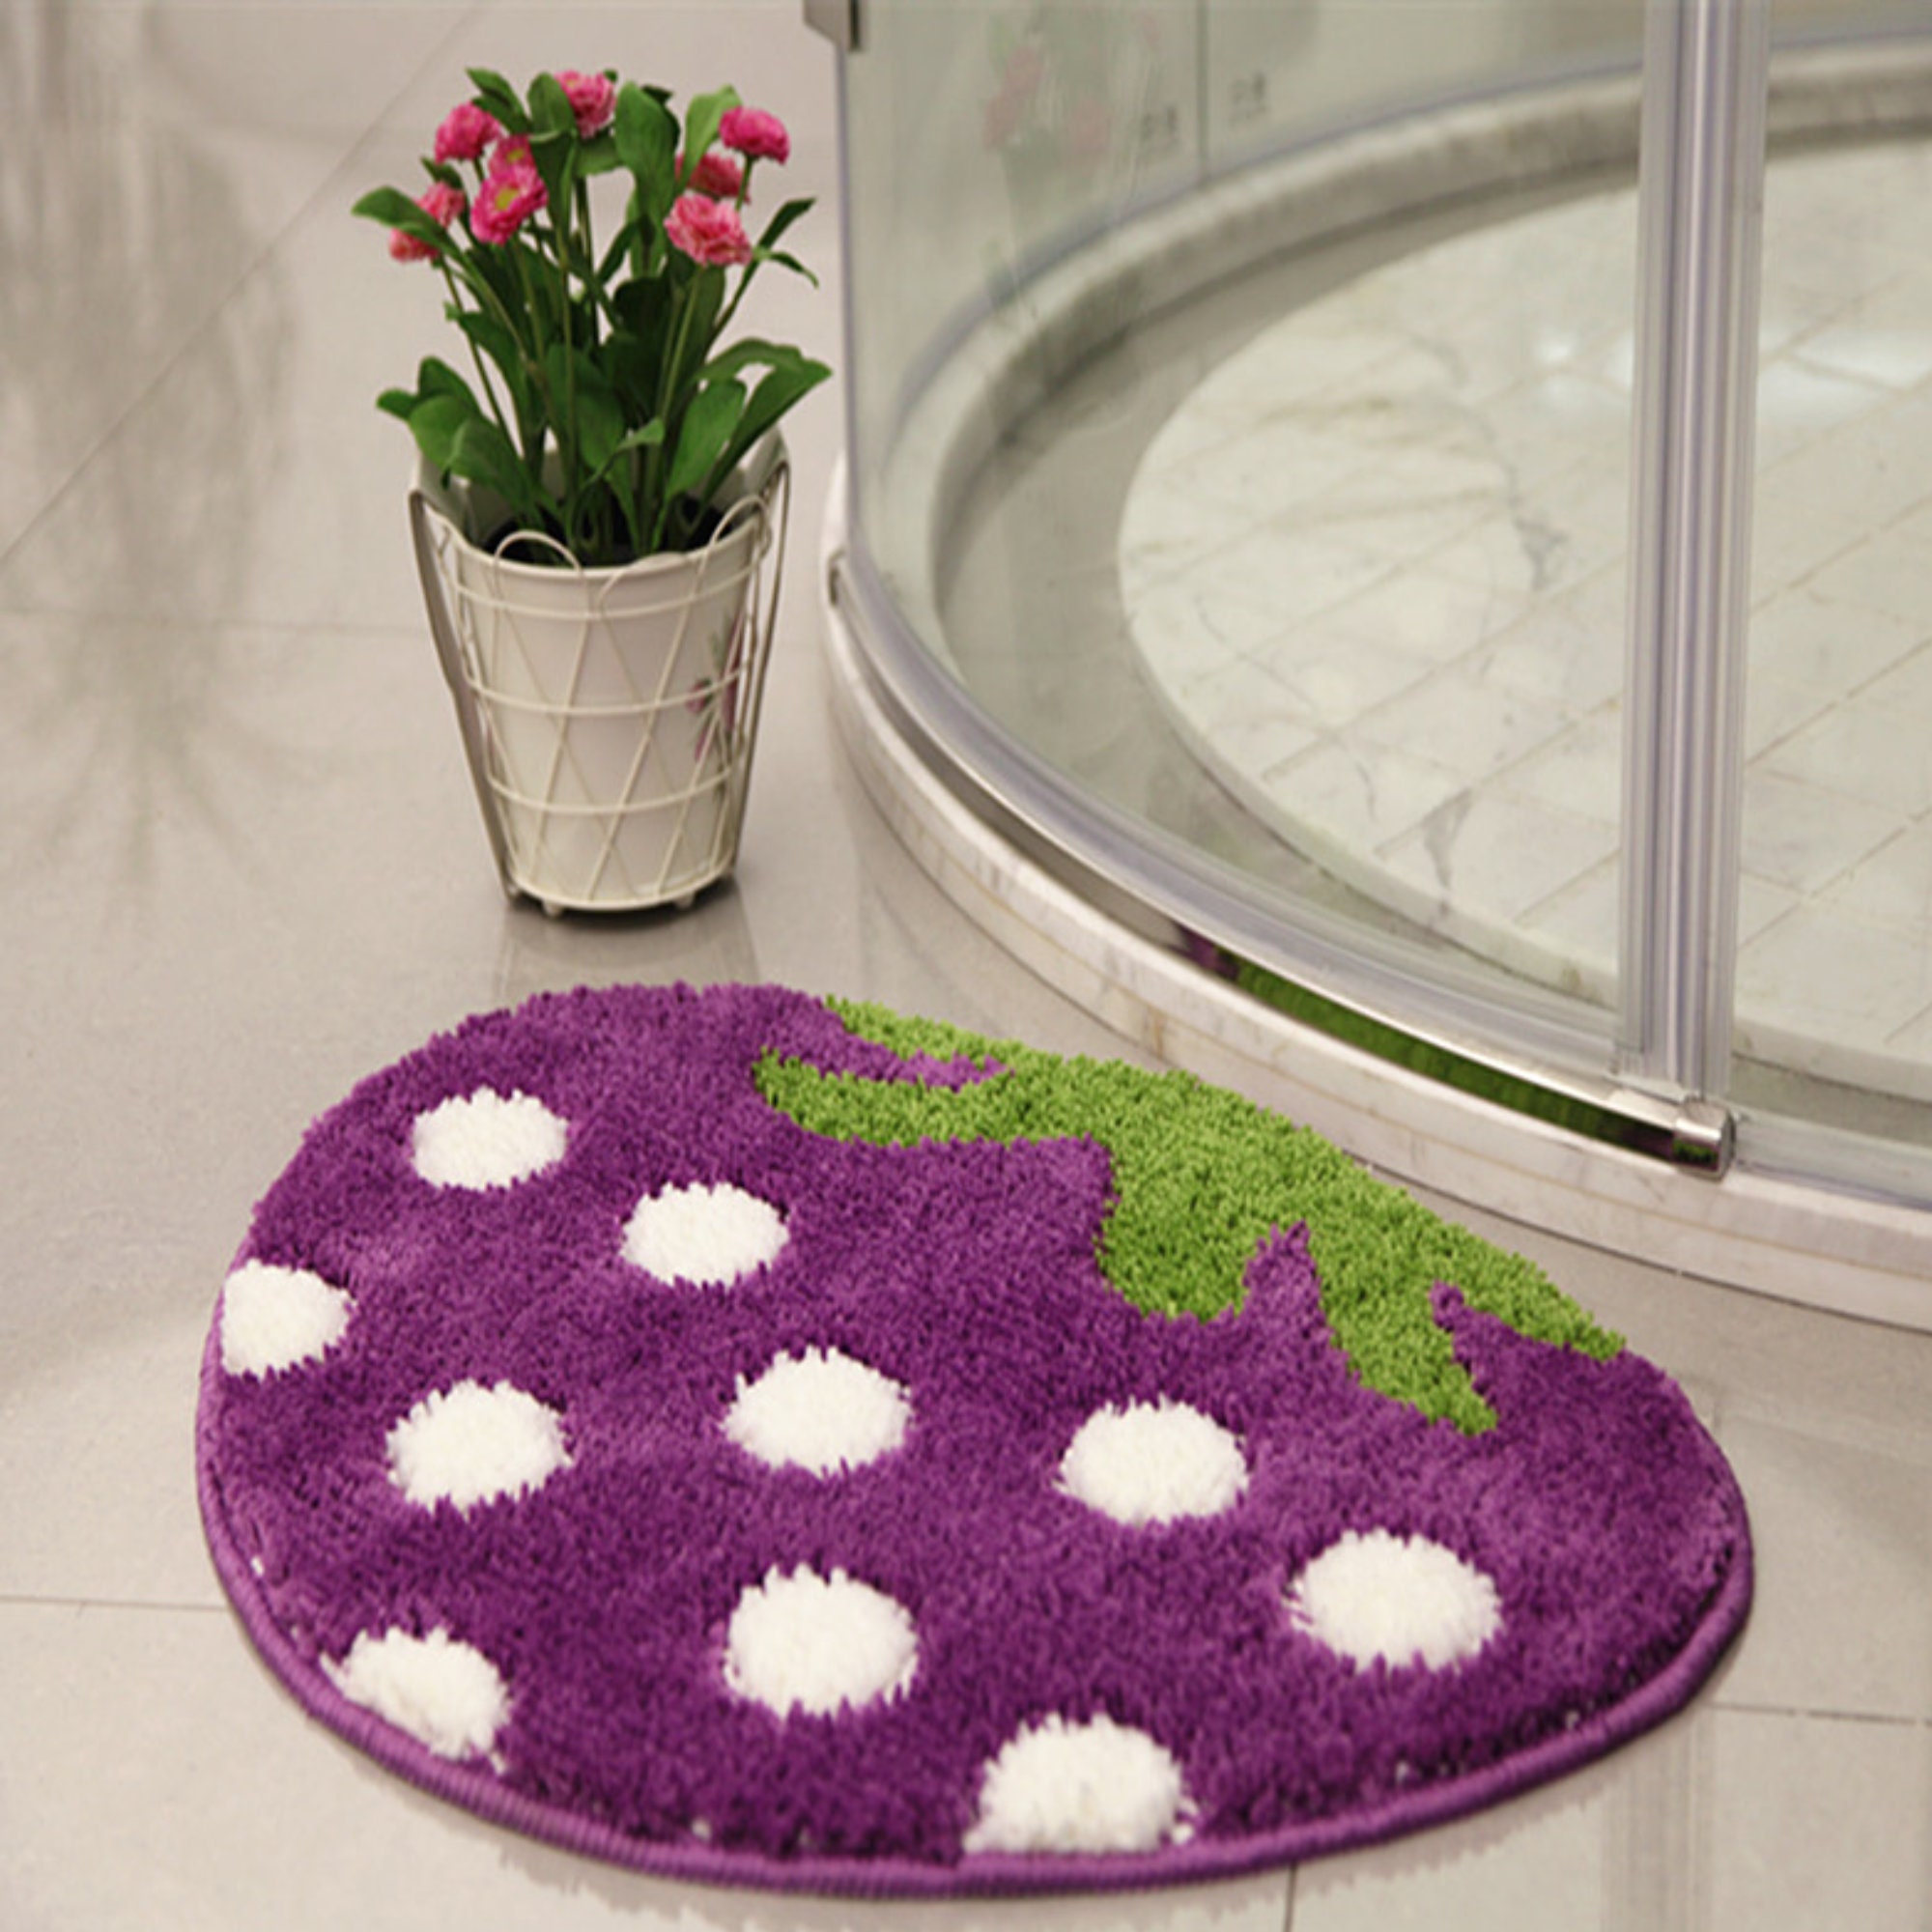 Buy Cute Bath Mats Online In India - Etsy India